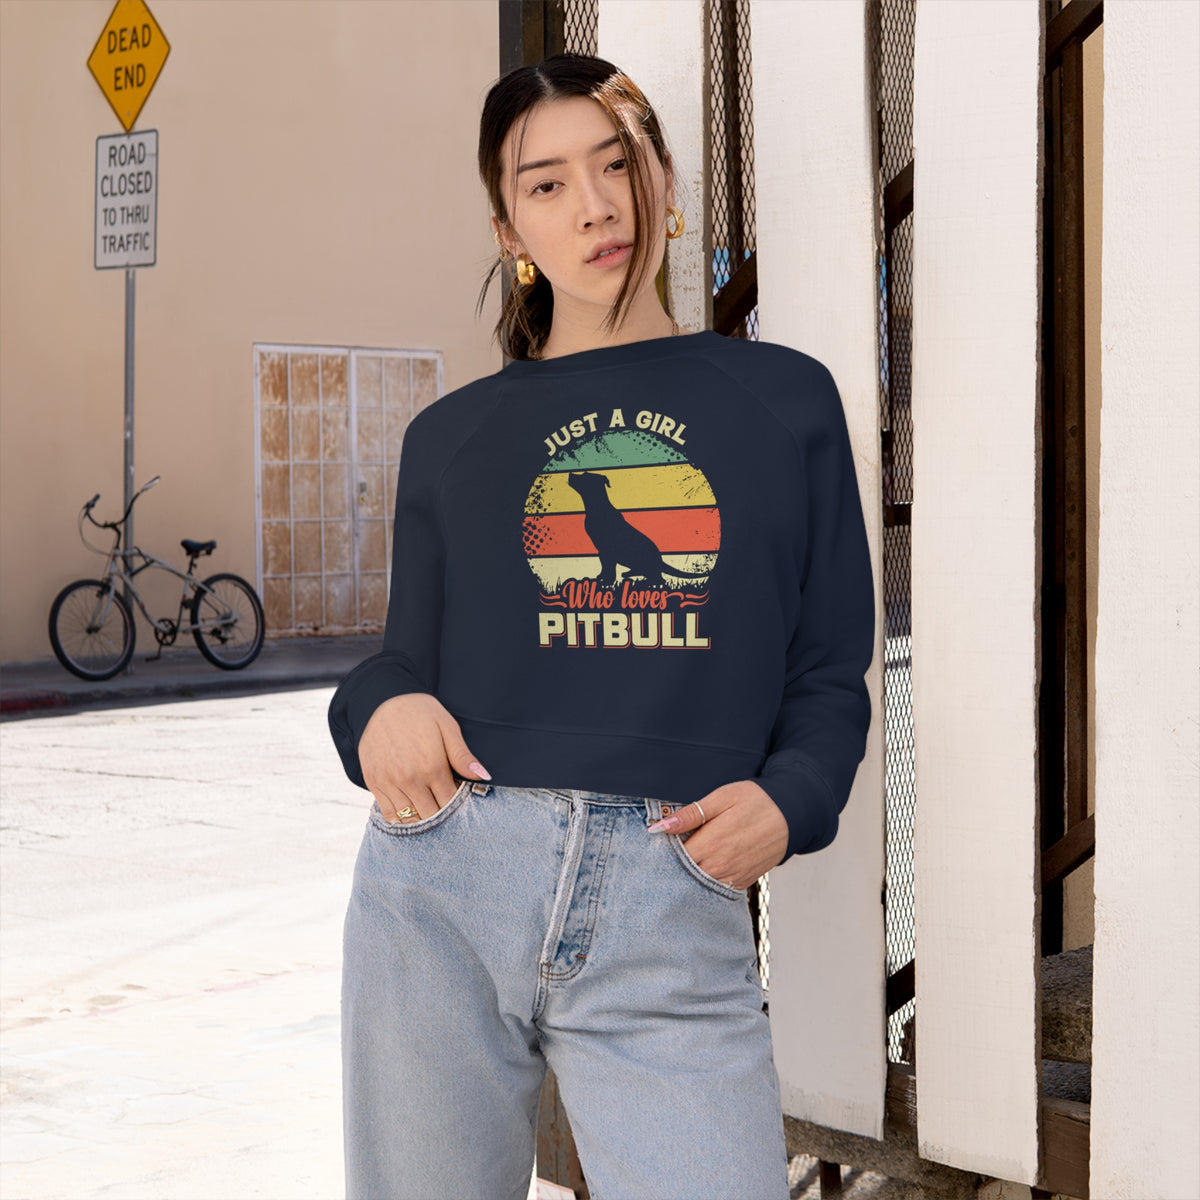 Just A Girl Who Loves Pitbull Women's Cropped Pullover